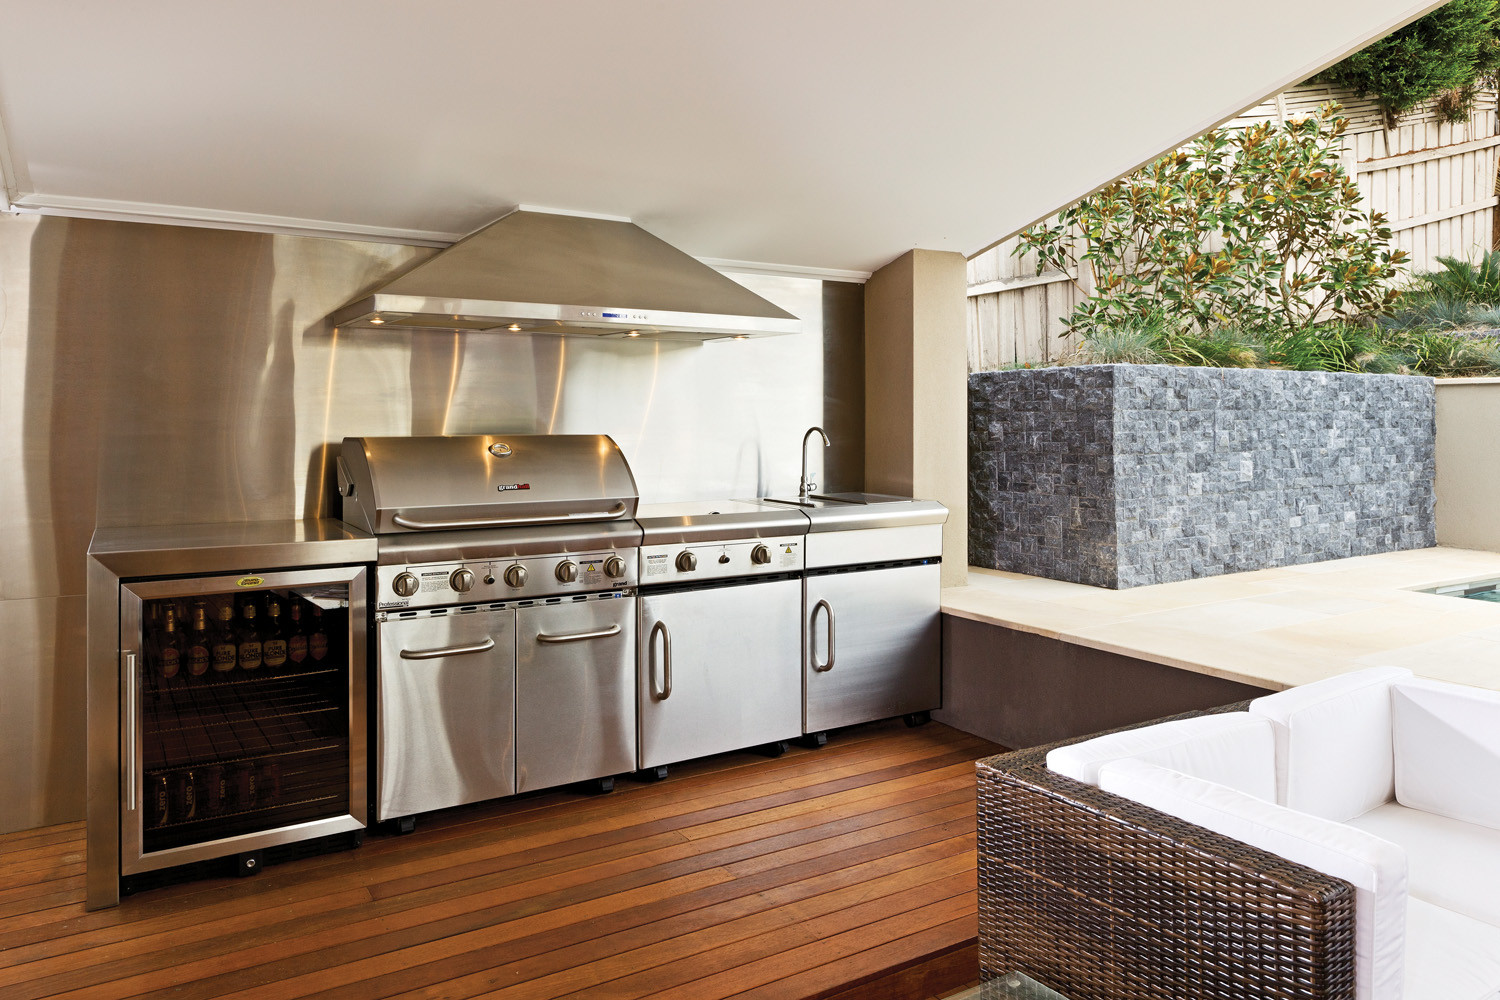 Stainless Outdoor Kitchen
 Cooking capers A look at outdoor kitchens pletehome